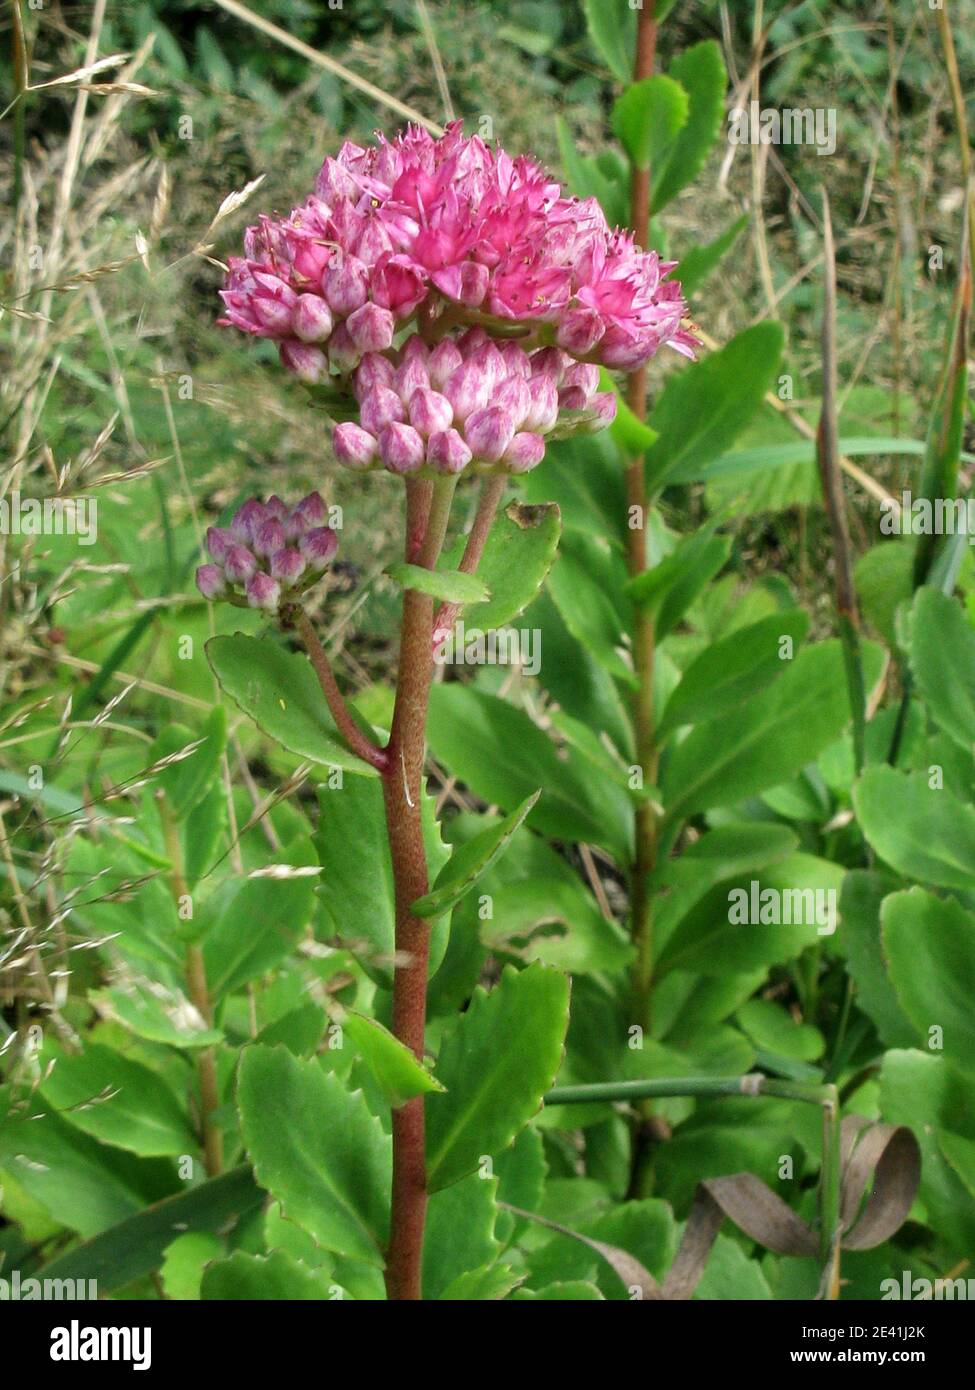 Orpine stonecrop, Garden stonecrop, Live-forever stonecrop (Sedum telephium, Hylotelephium telephium), blooming, Germany Stock Photo